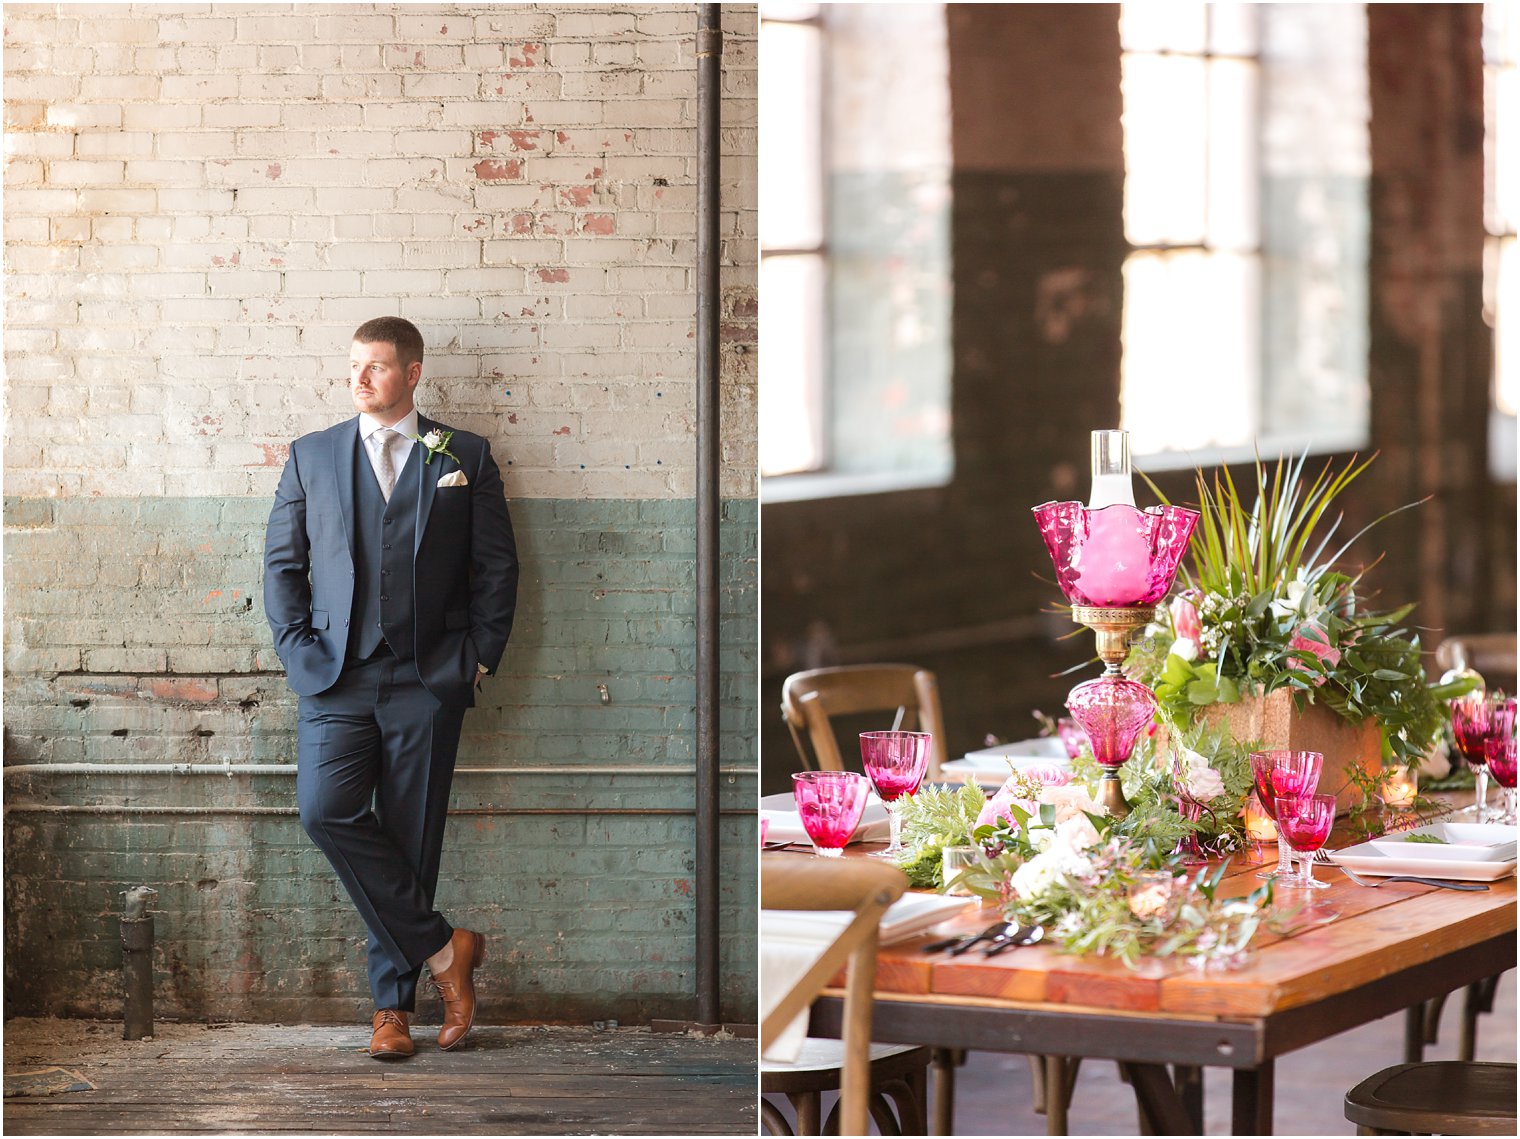 Wedding editorial at The Art Factory